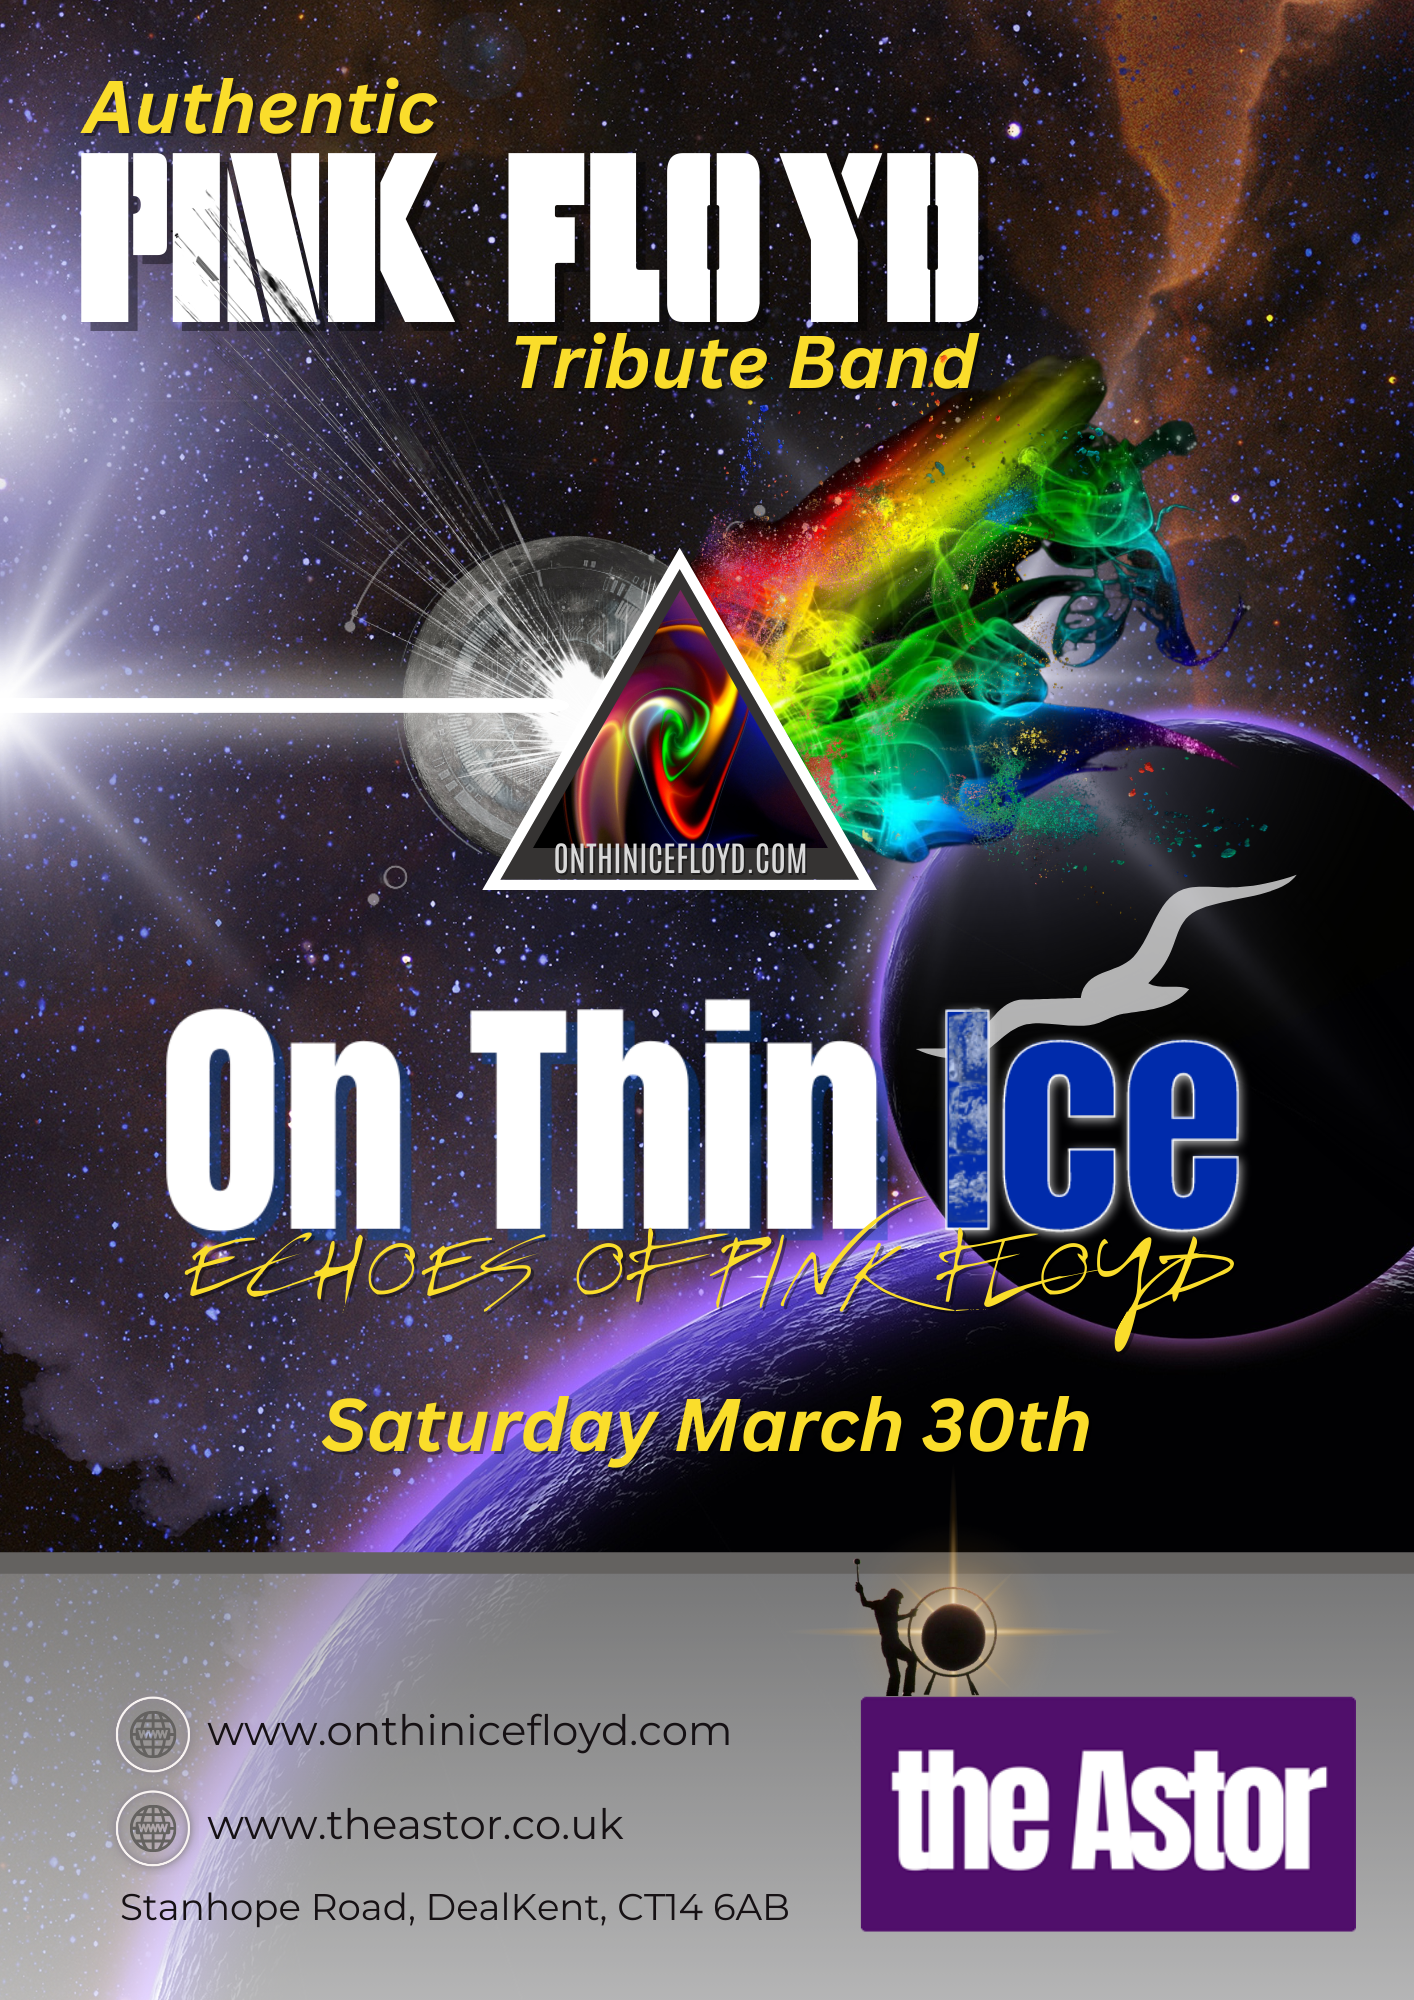 Image representing Echoes of Pink Floyd - On Thin Ice from The Astor Theatre